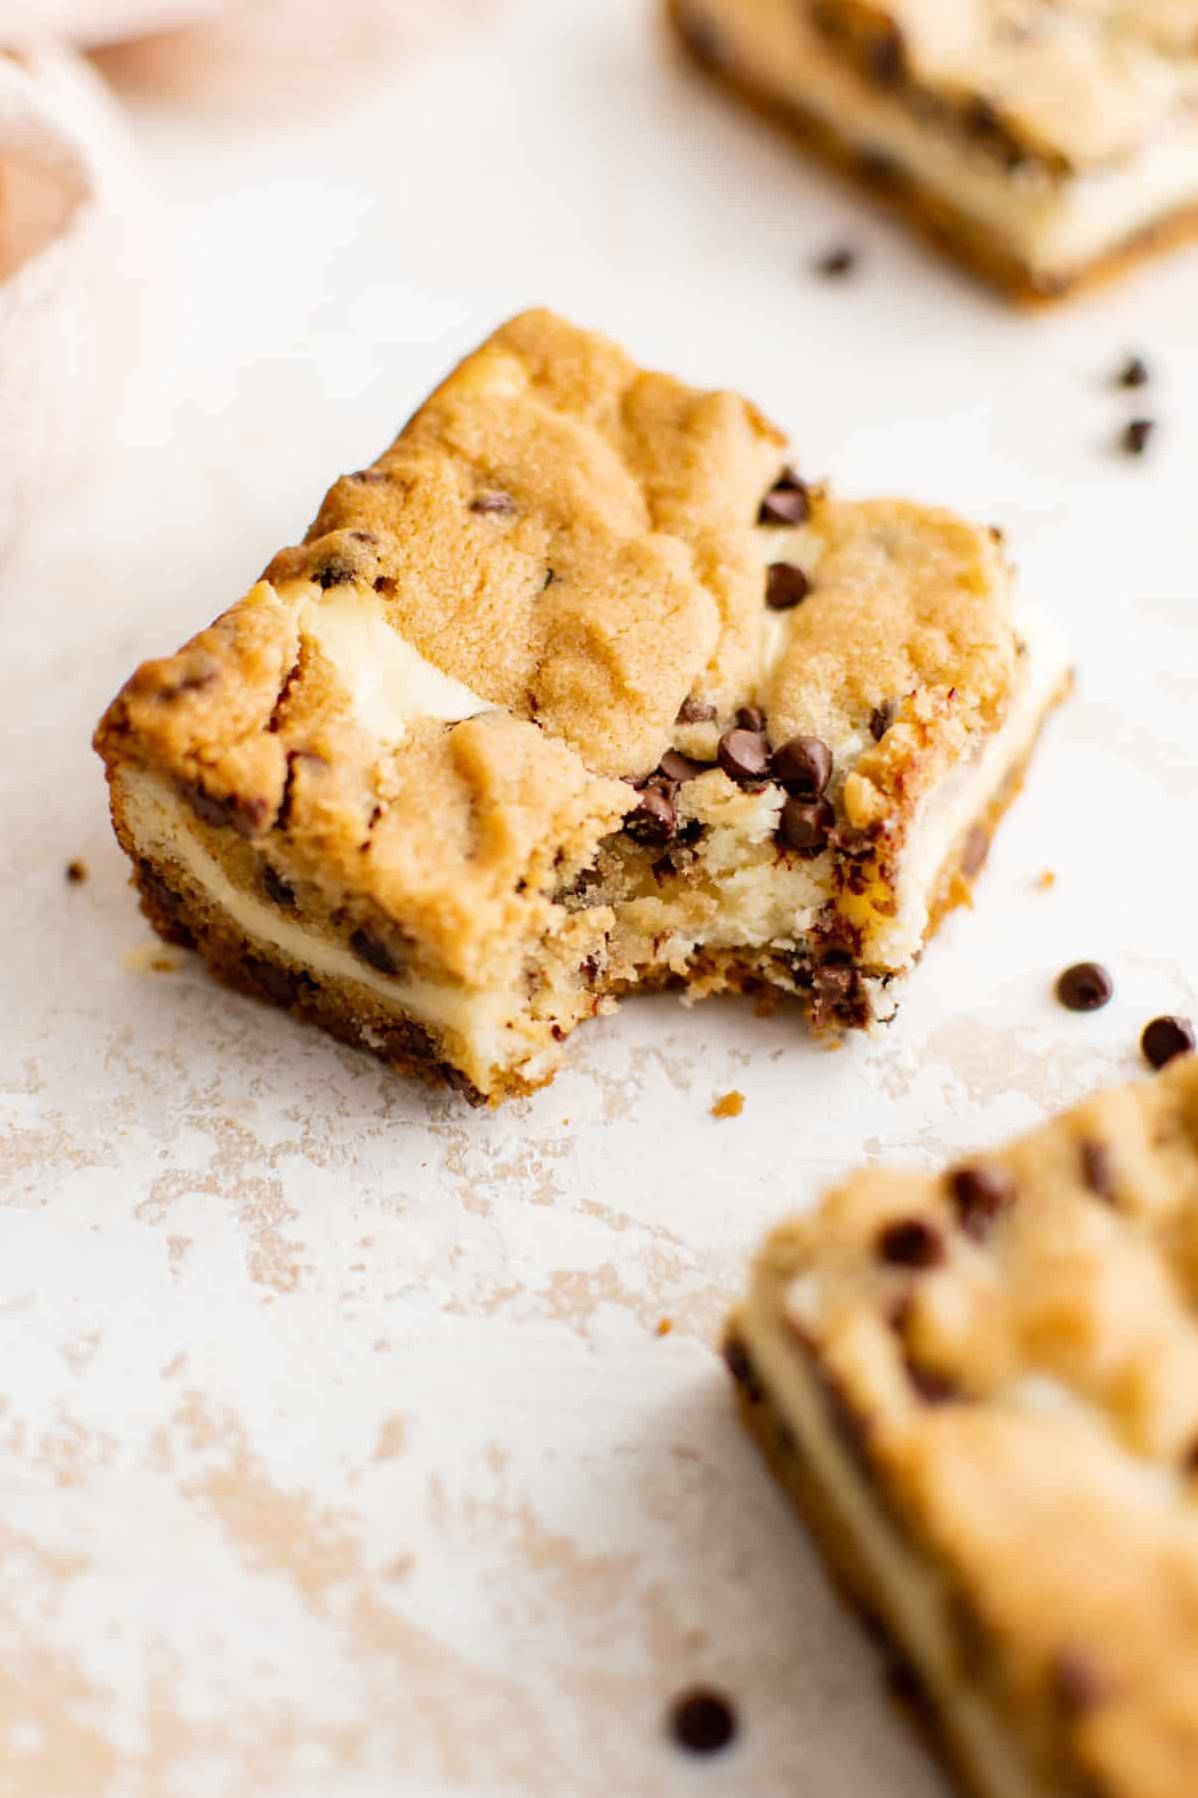  Treat yourself to a heavenly bite of these mocha chocolate chip cheesecake bars.